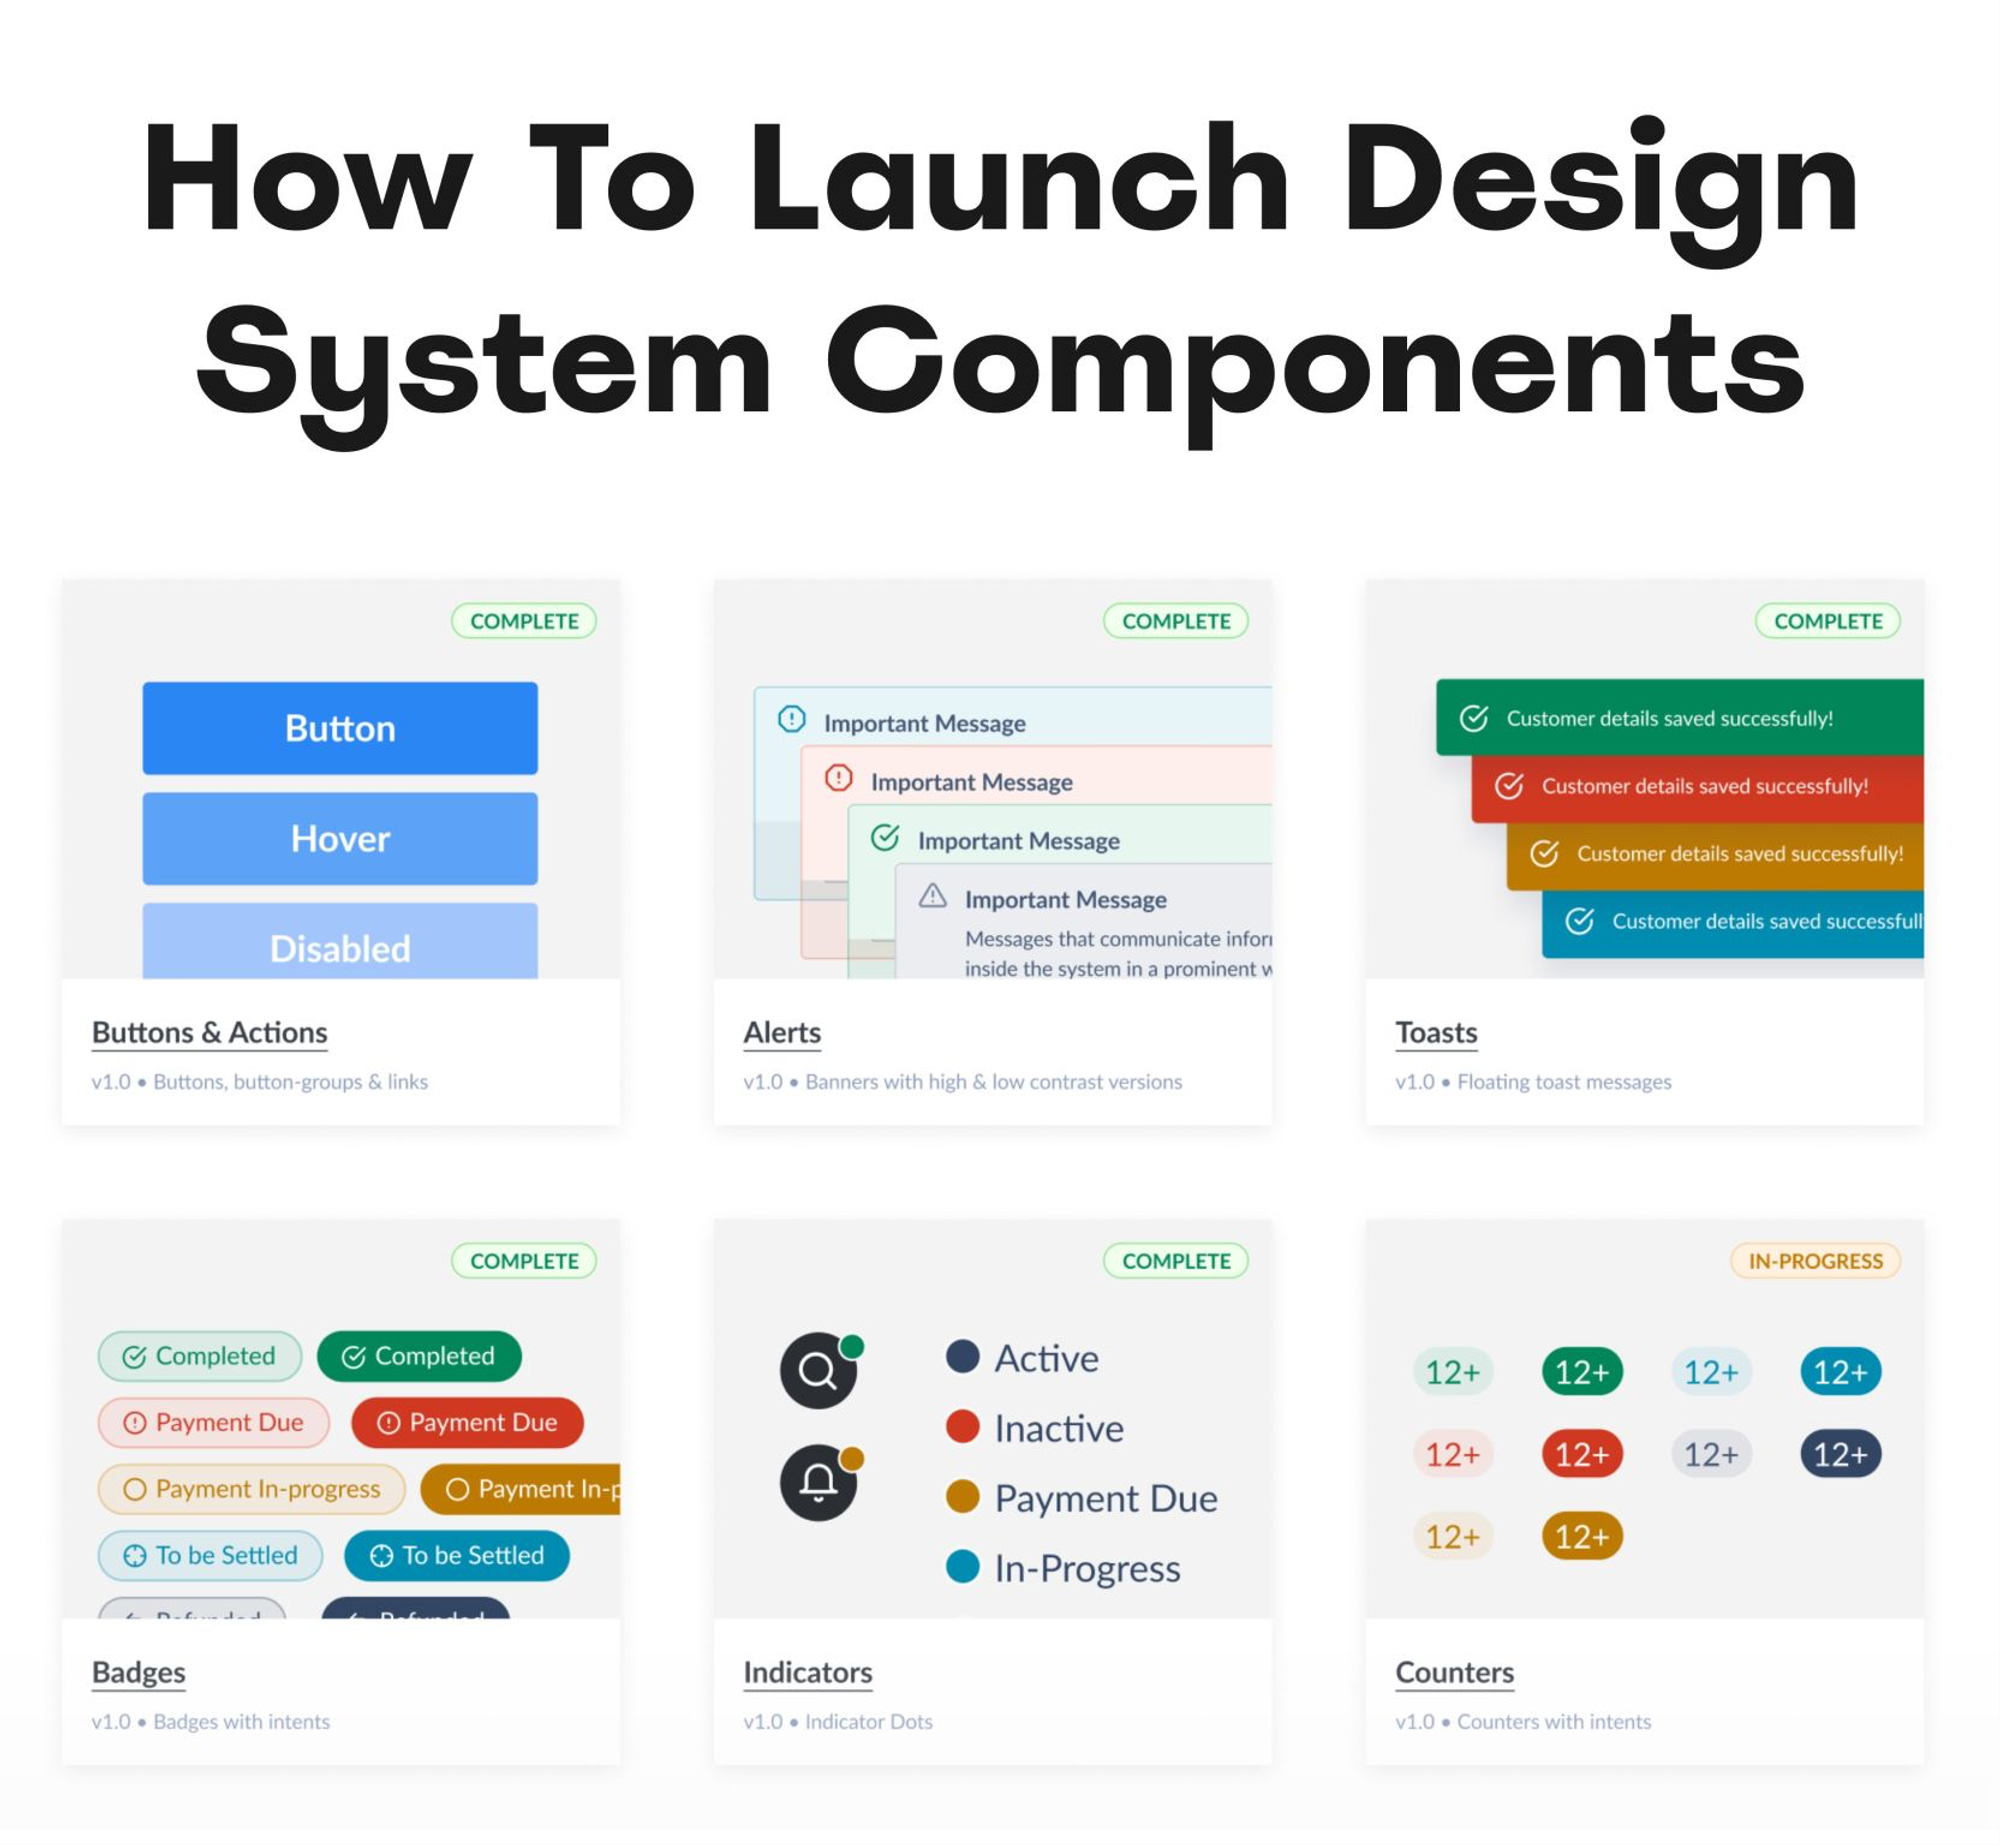 How To Launch Design System Components by Vitaly Friedman